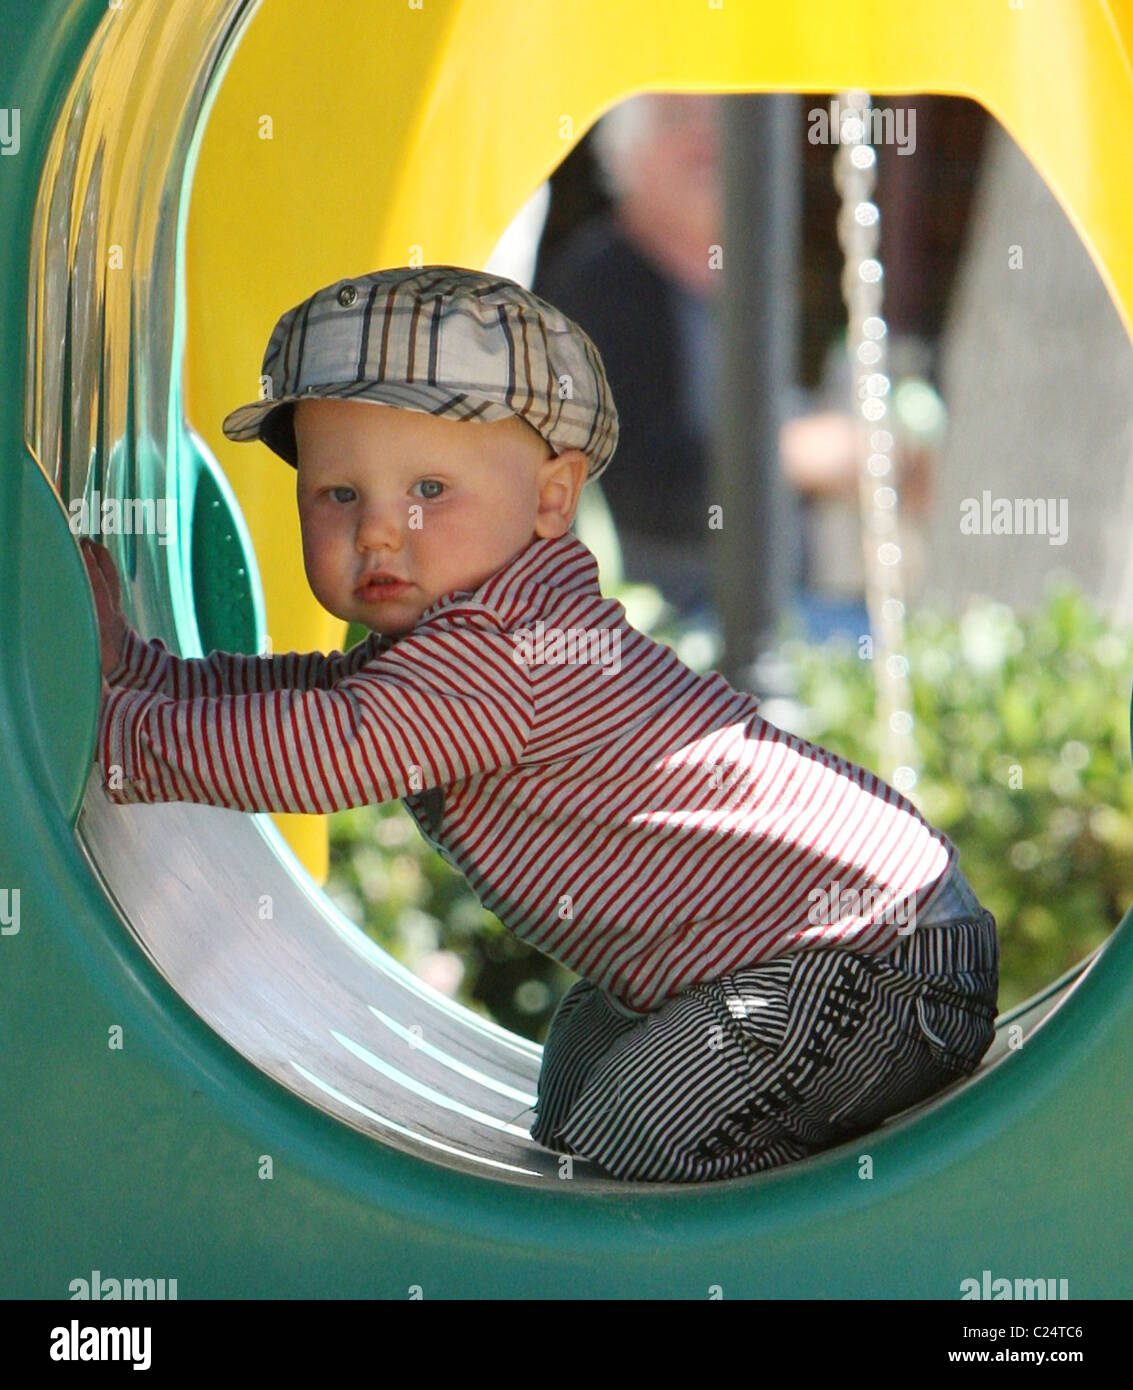 Henry Story Driver Minnie Driver and son Henry spend time together in Cross Creek Park in Malibu Malibu, California - 27.10.09 Stock Photo